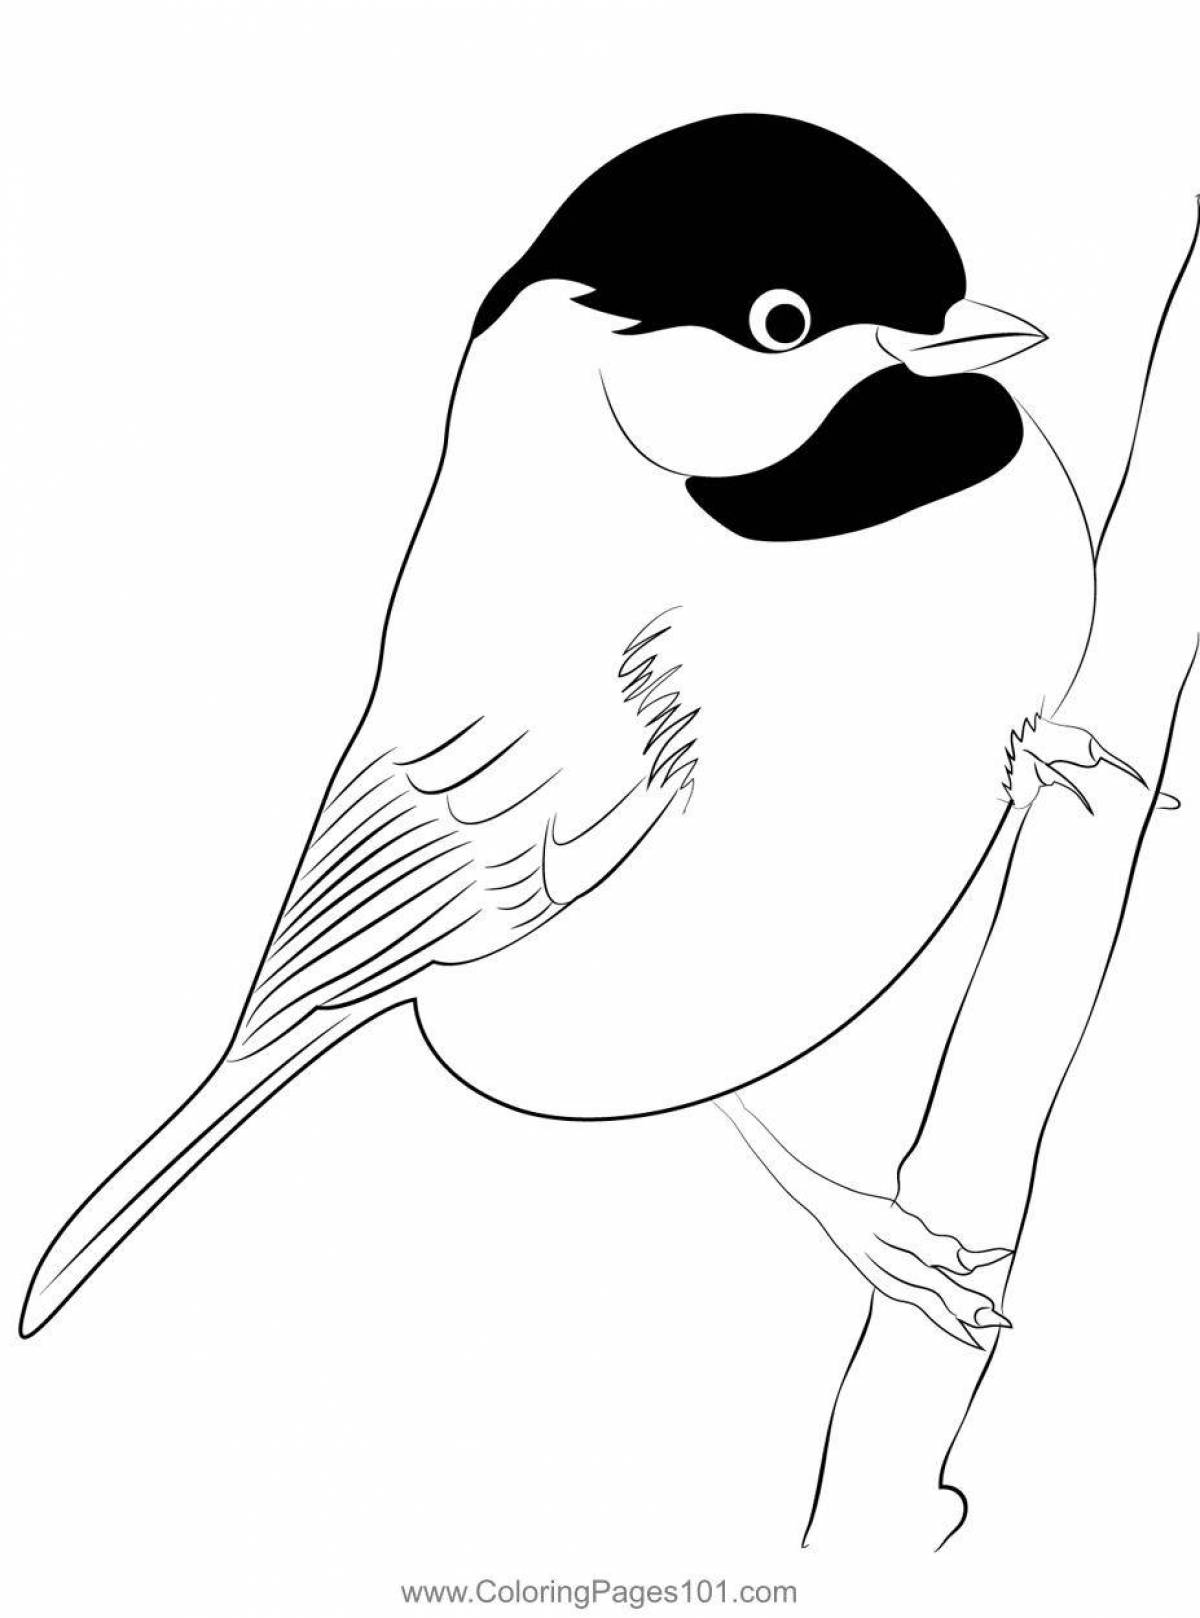 Children's titmouse coloring book for children 4-5 years old